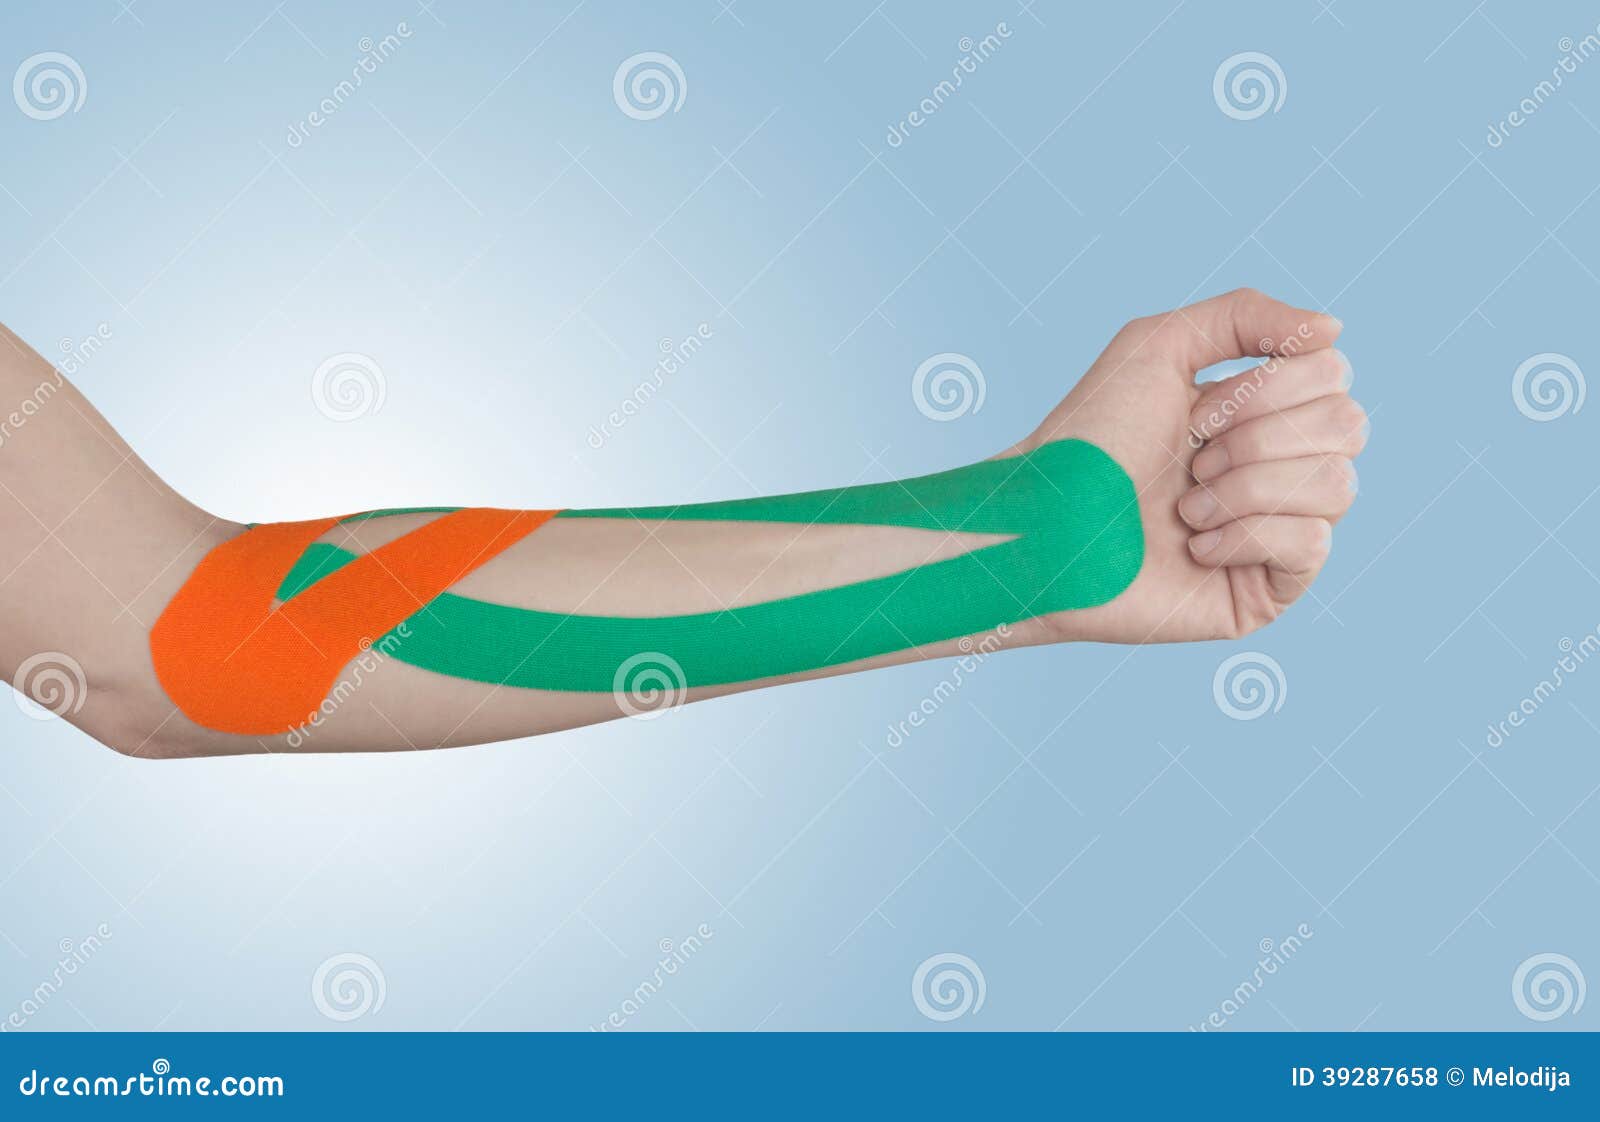 physiotherapy for elbow pain, aches and tension.